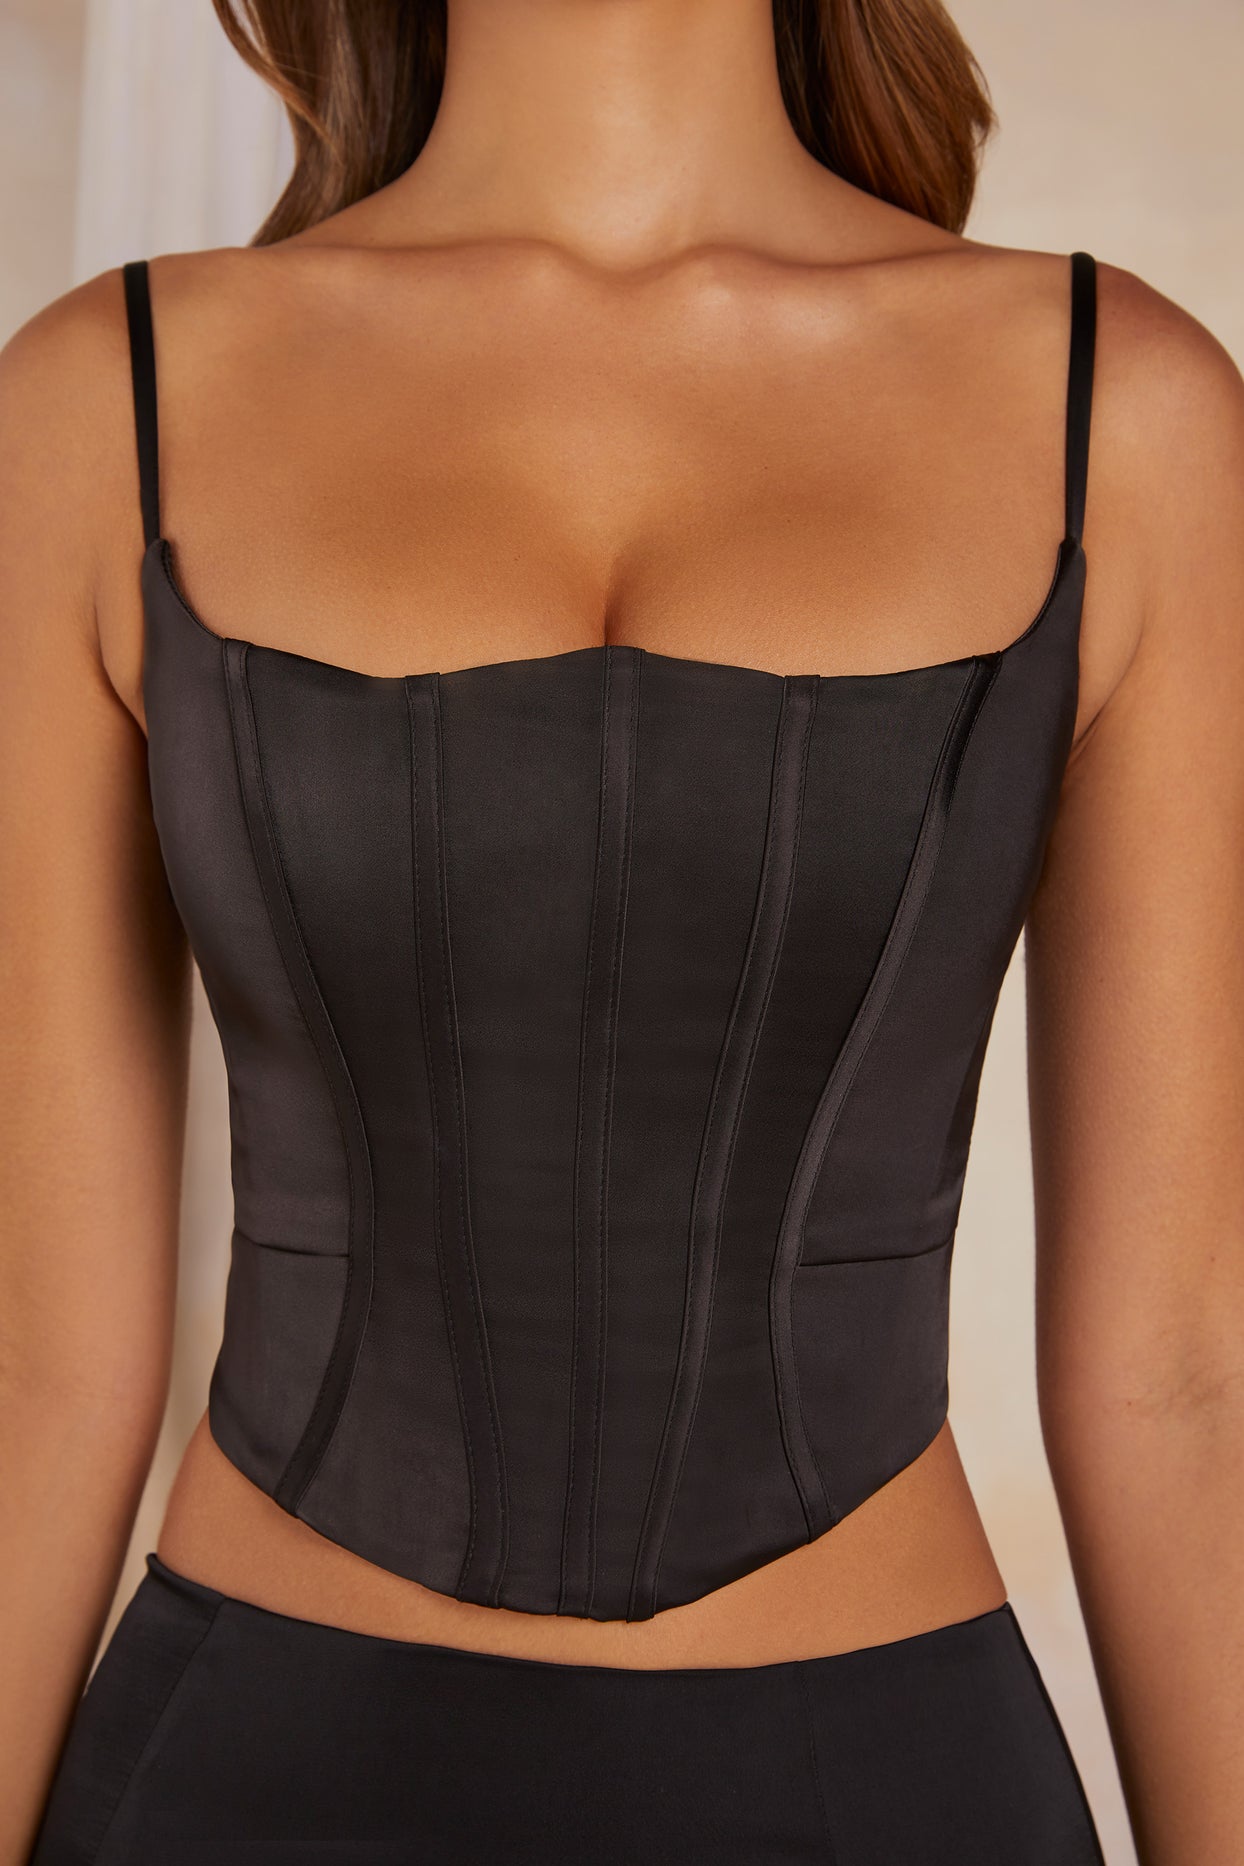 Where to Buy a Corset: Over 50 Places to Find Your Next Corset